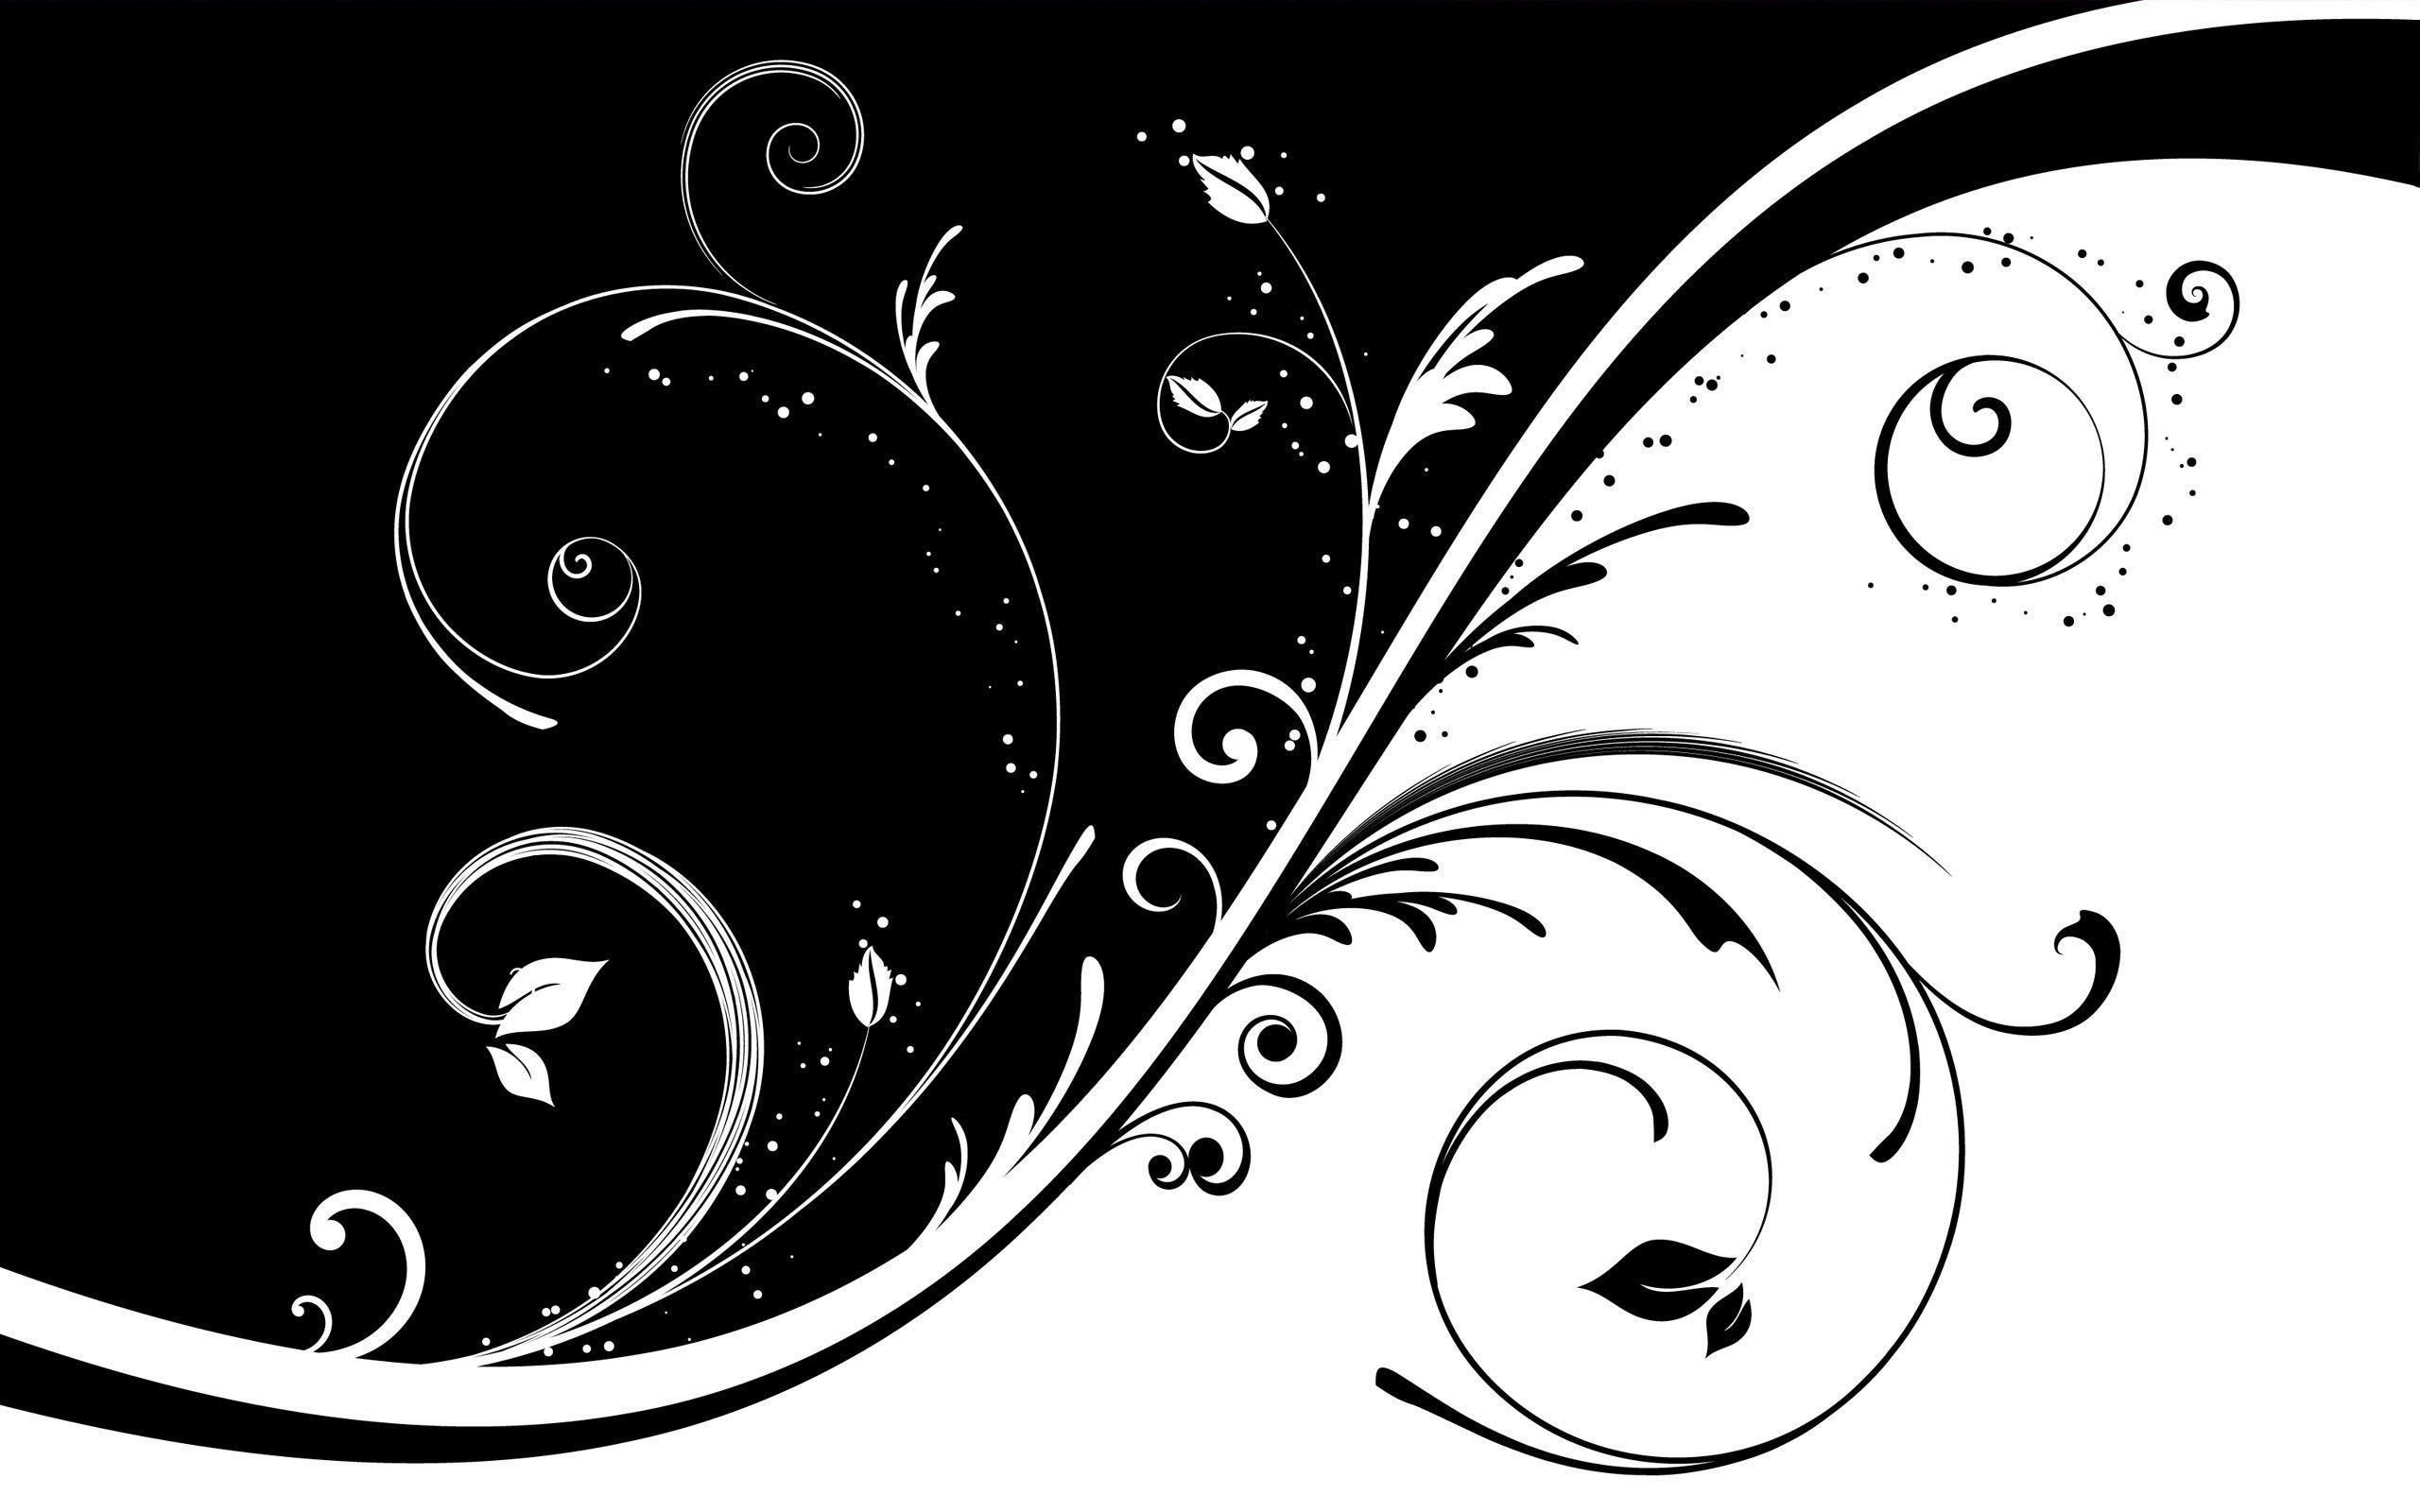 General 2560x1600 abstract pattern monochrome